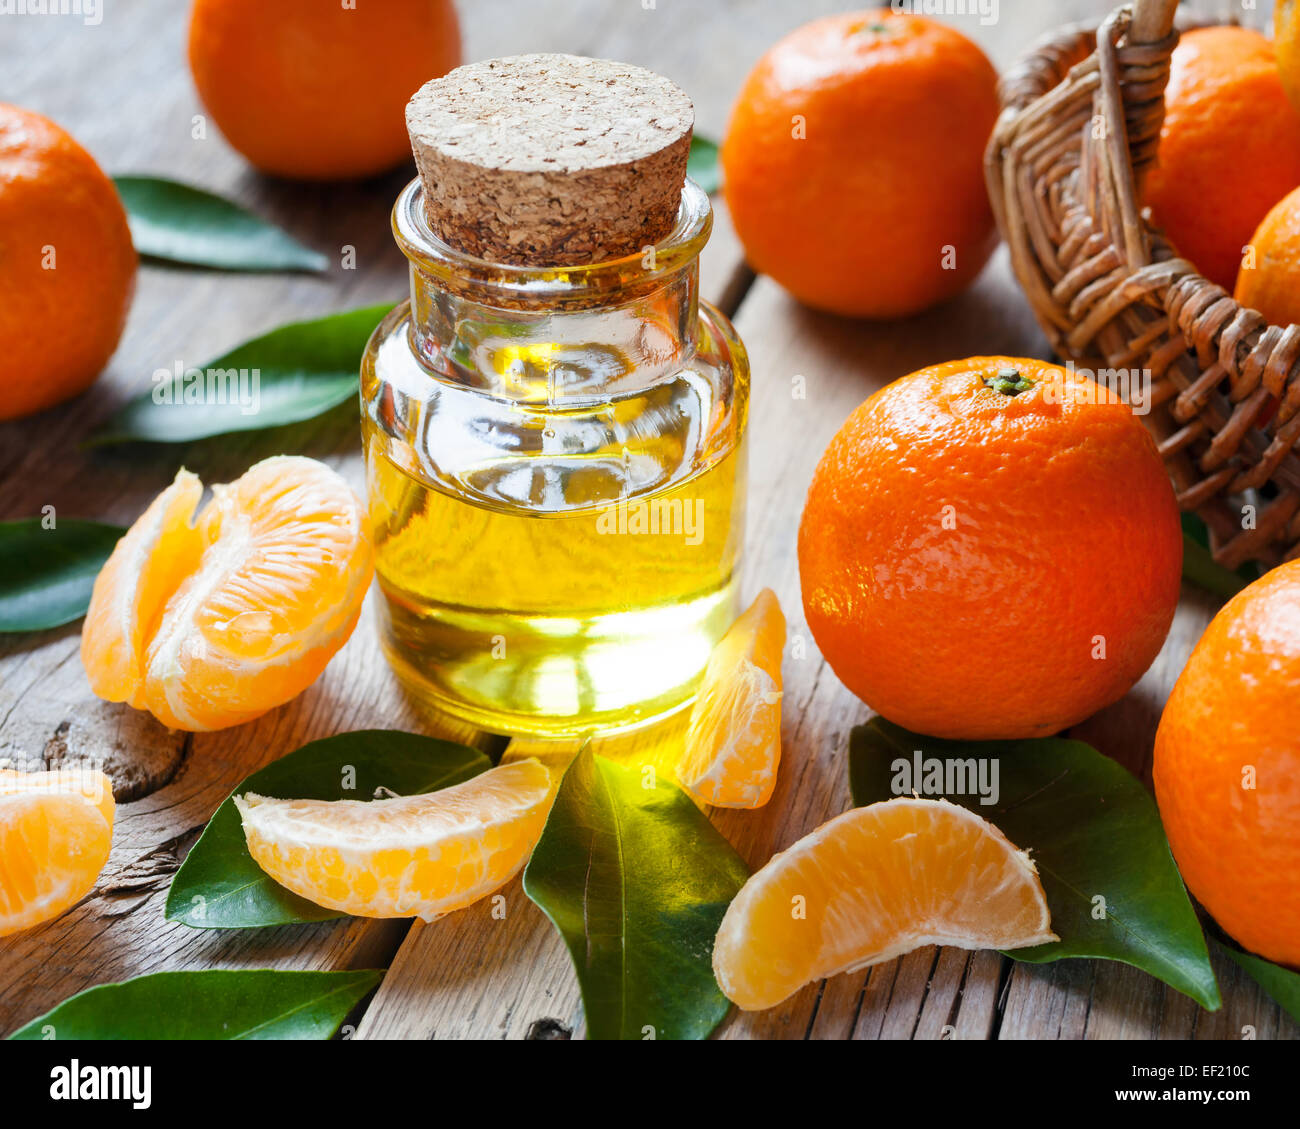 Bottle of essential citrus oil and ripe tangerines with leaves on old wooden kitchen table. Stock Photo